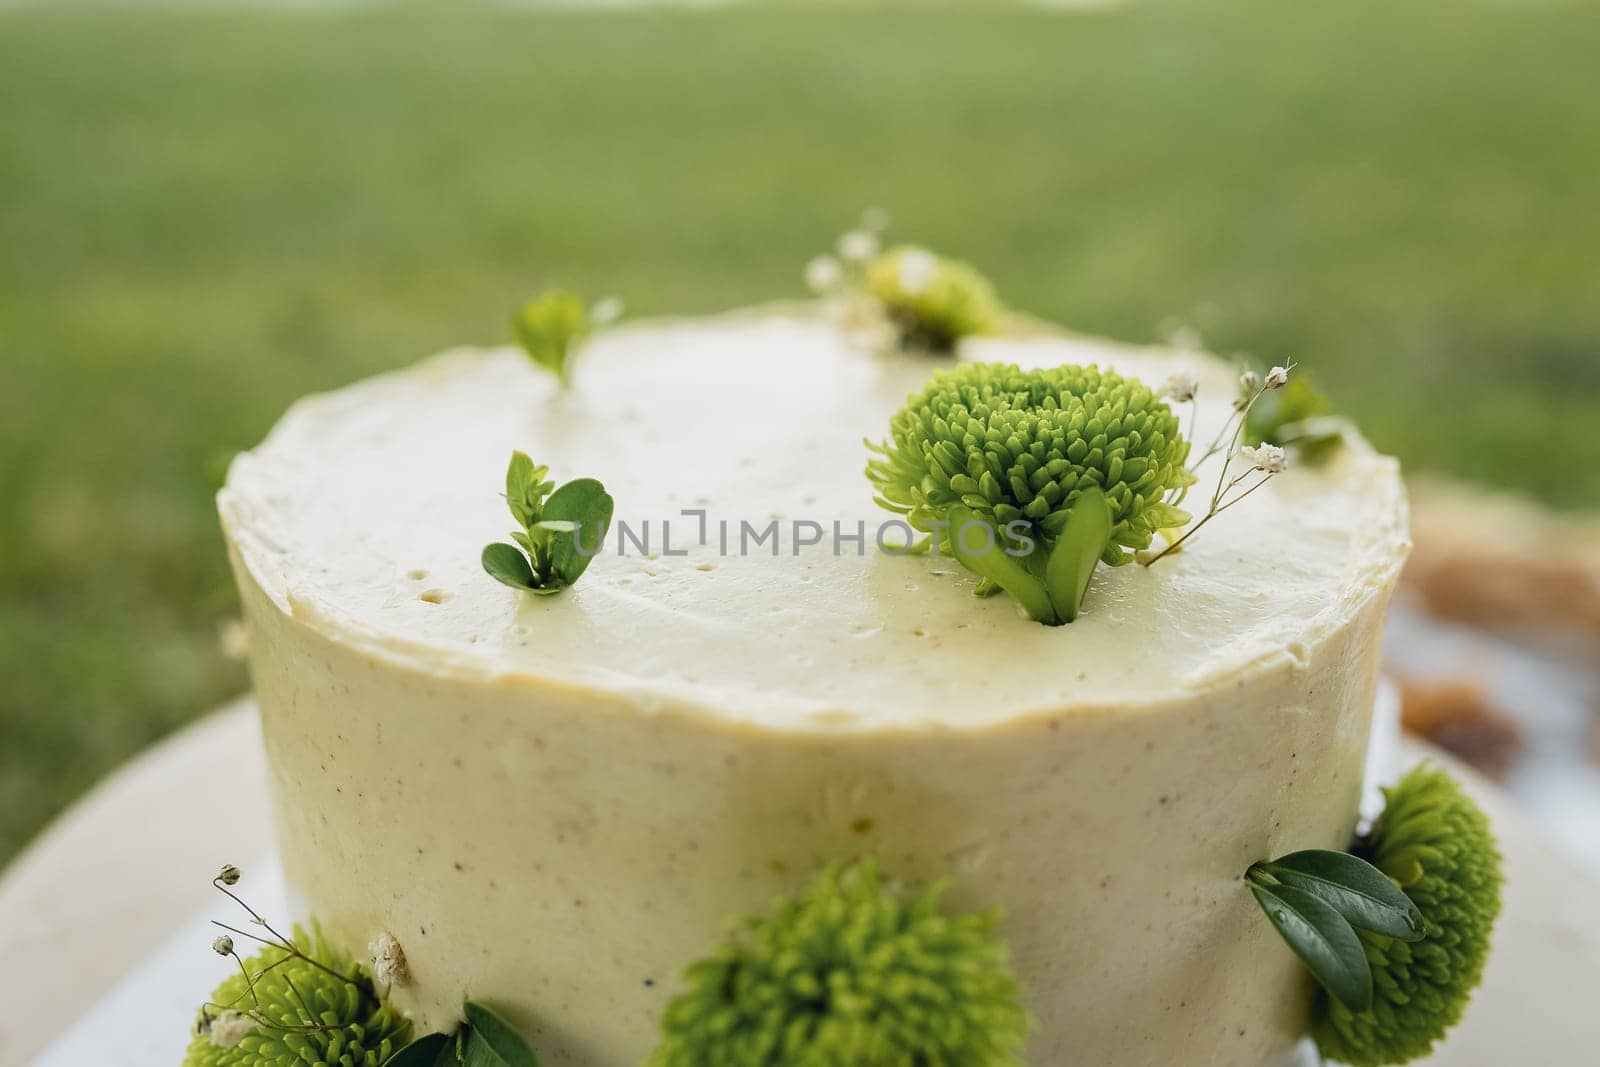 Elegant White Cake Adorned With Green Floral Details by Miron